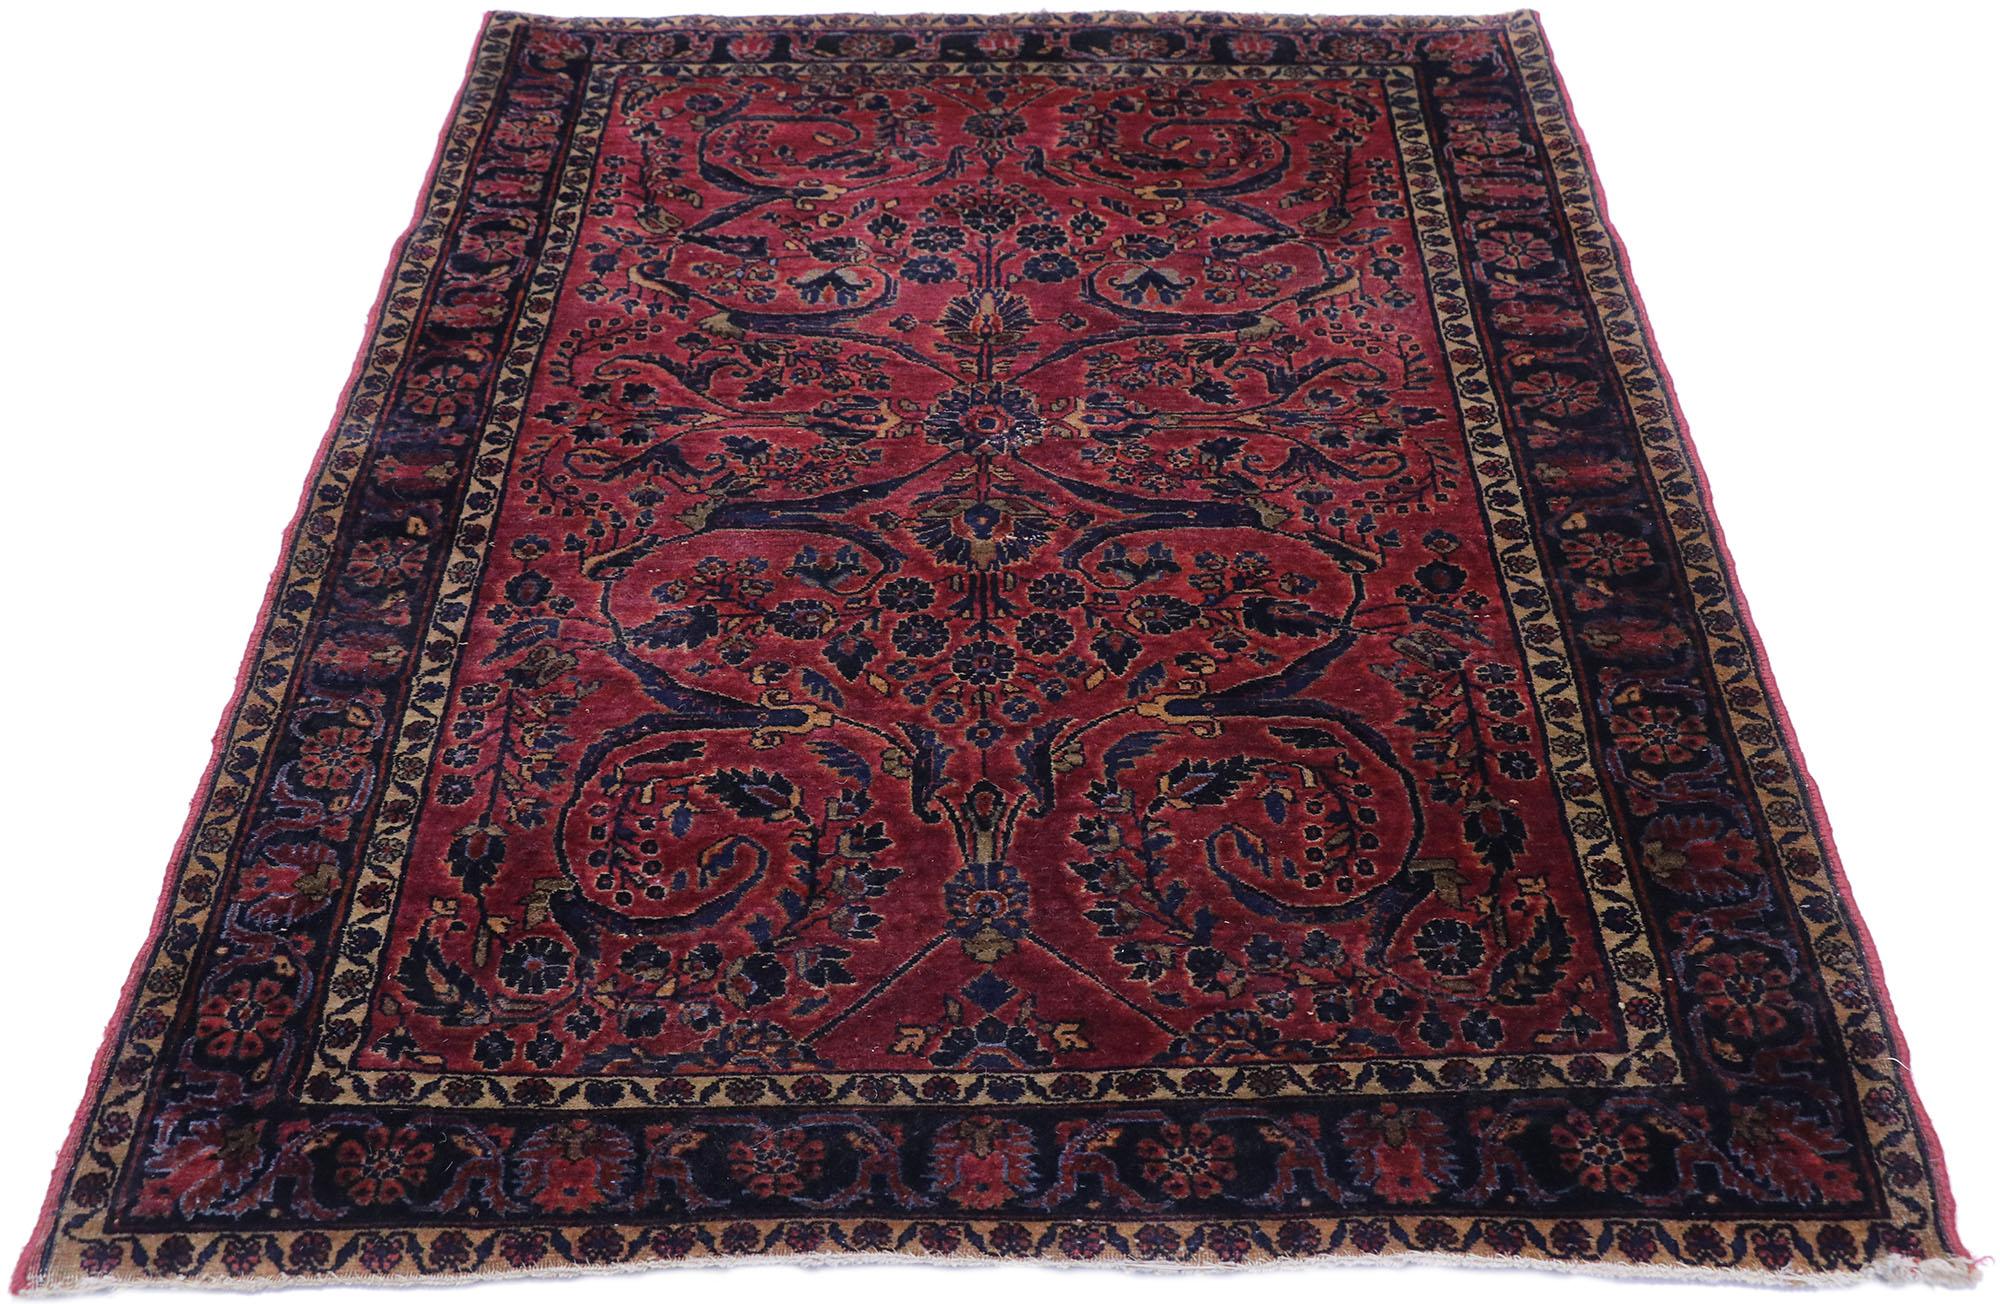 Sarouk Farahan Antique Persian Sarouk Rug with Old World Victorian Style For Sale